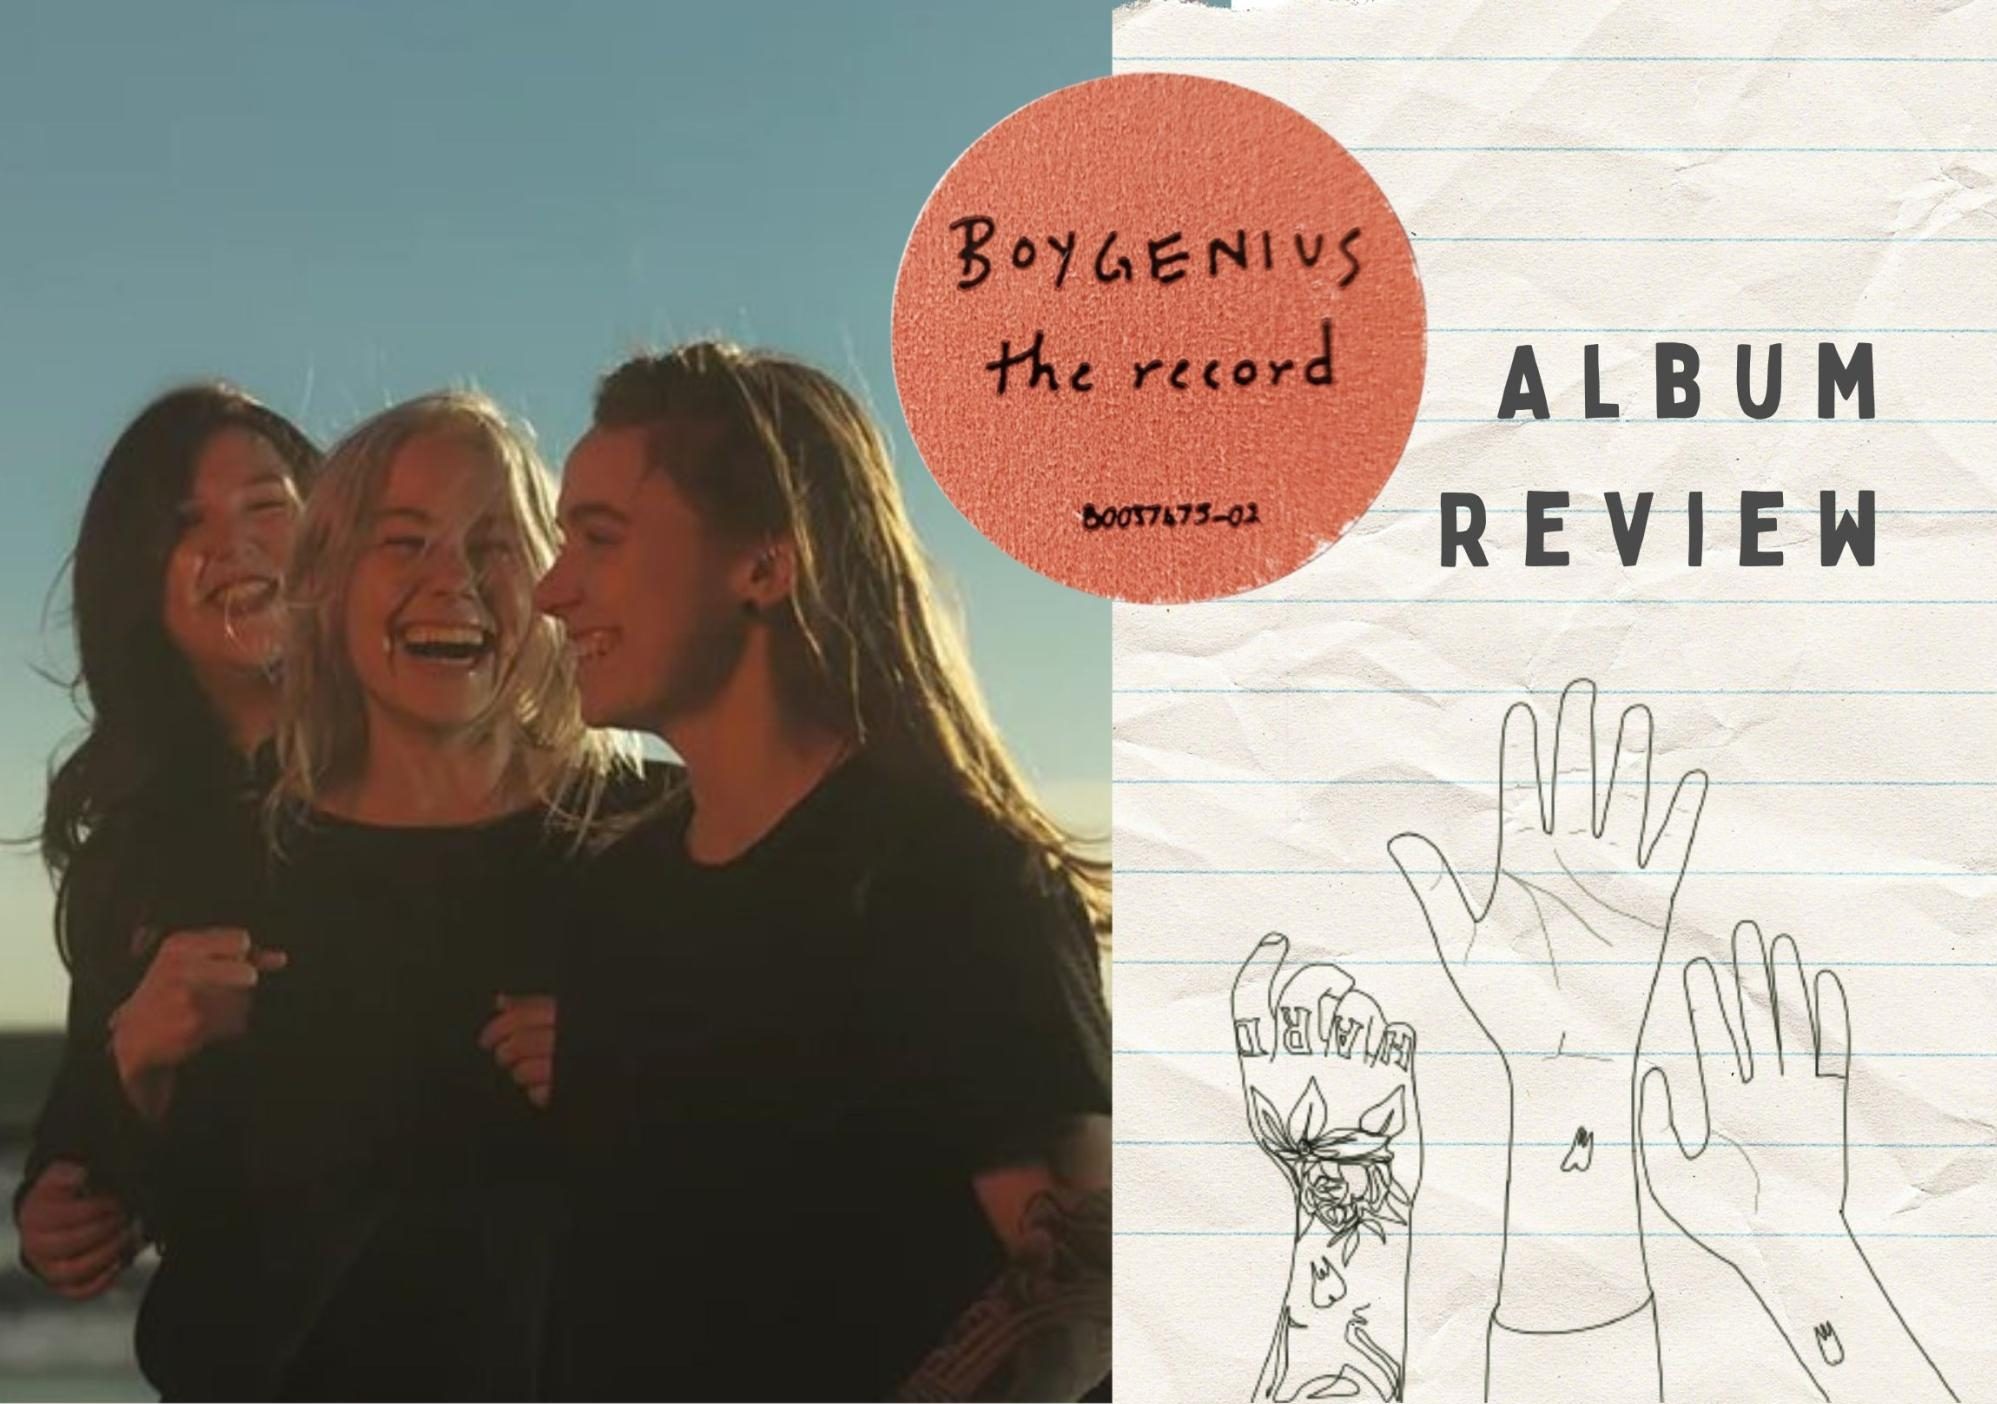 The graphic above showcases an image of Lucy Dacus, Phoebe Bridgers, and Julien Baker, the members of boygenius. The picture is one of a series of images from the groups beach photoshoot that released along with their debut album The Record on Mar. 31. They are currently touring in the US and internationally .